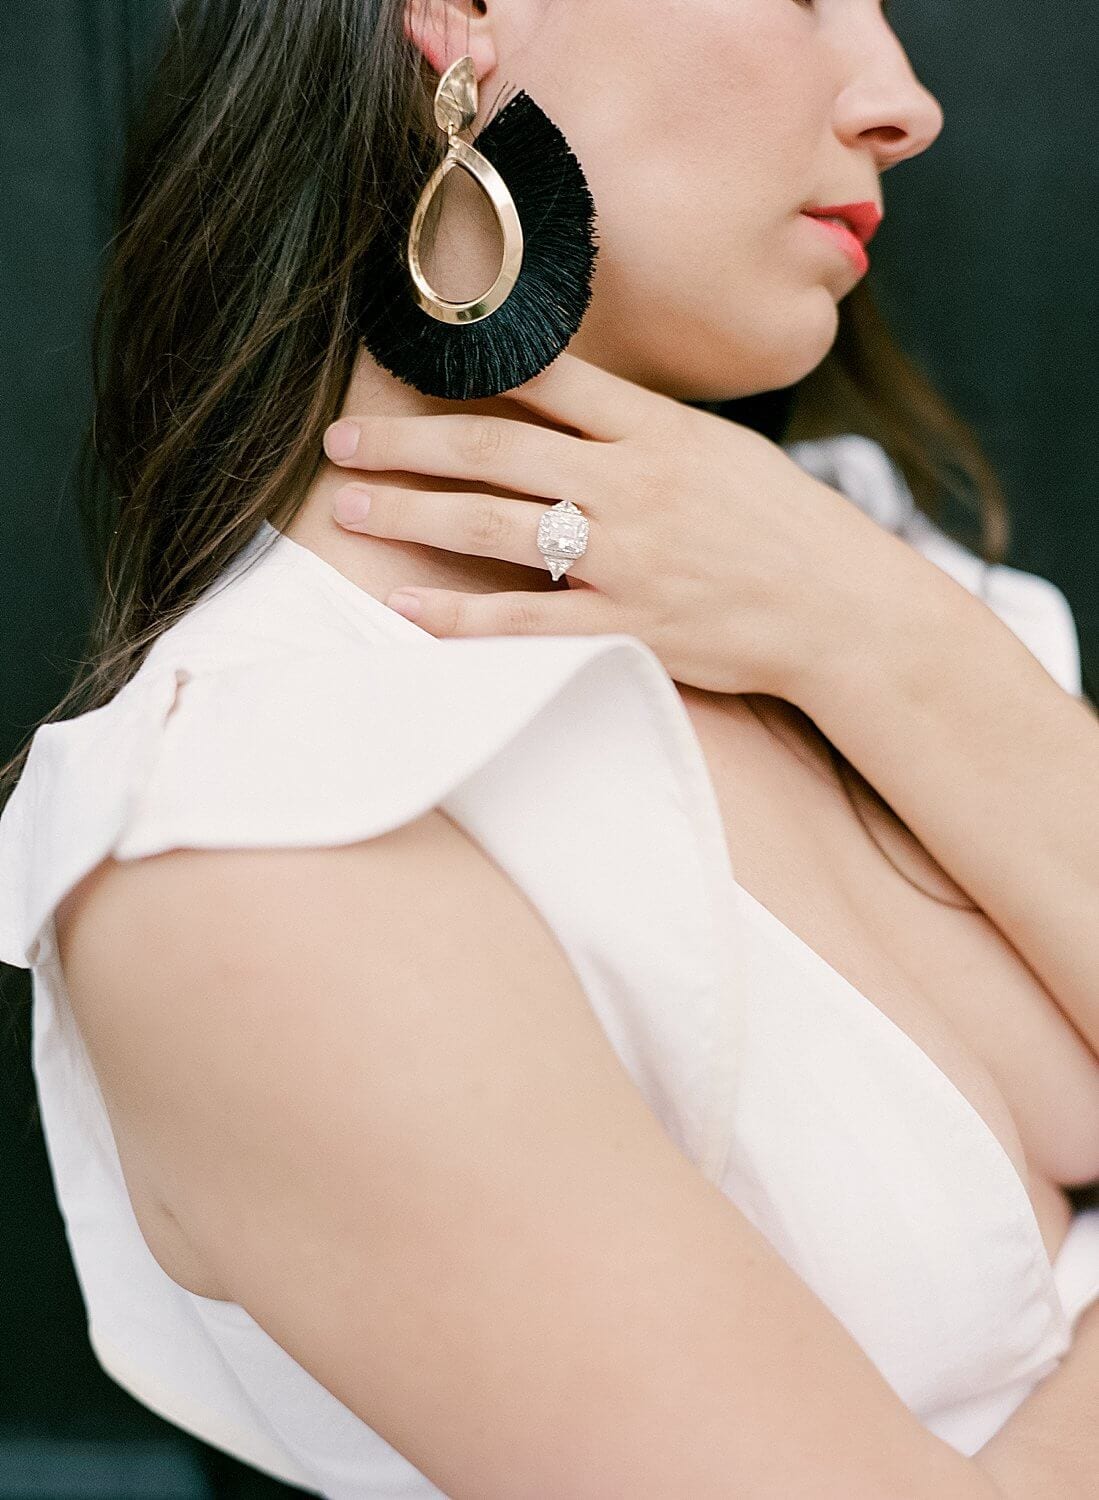 model showing off earrings and ring for an editorial shoot